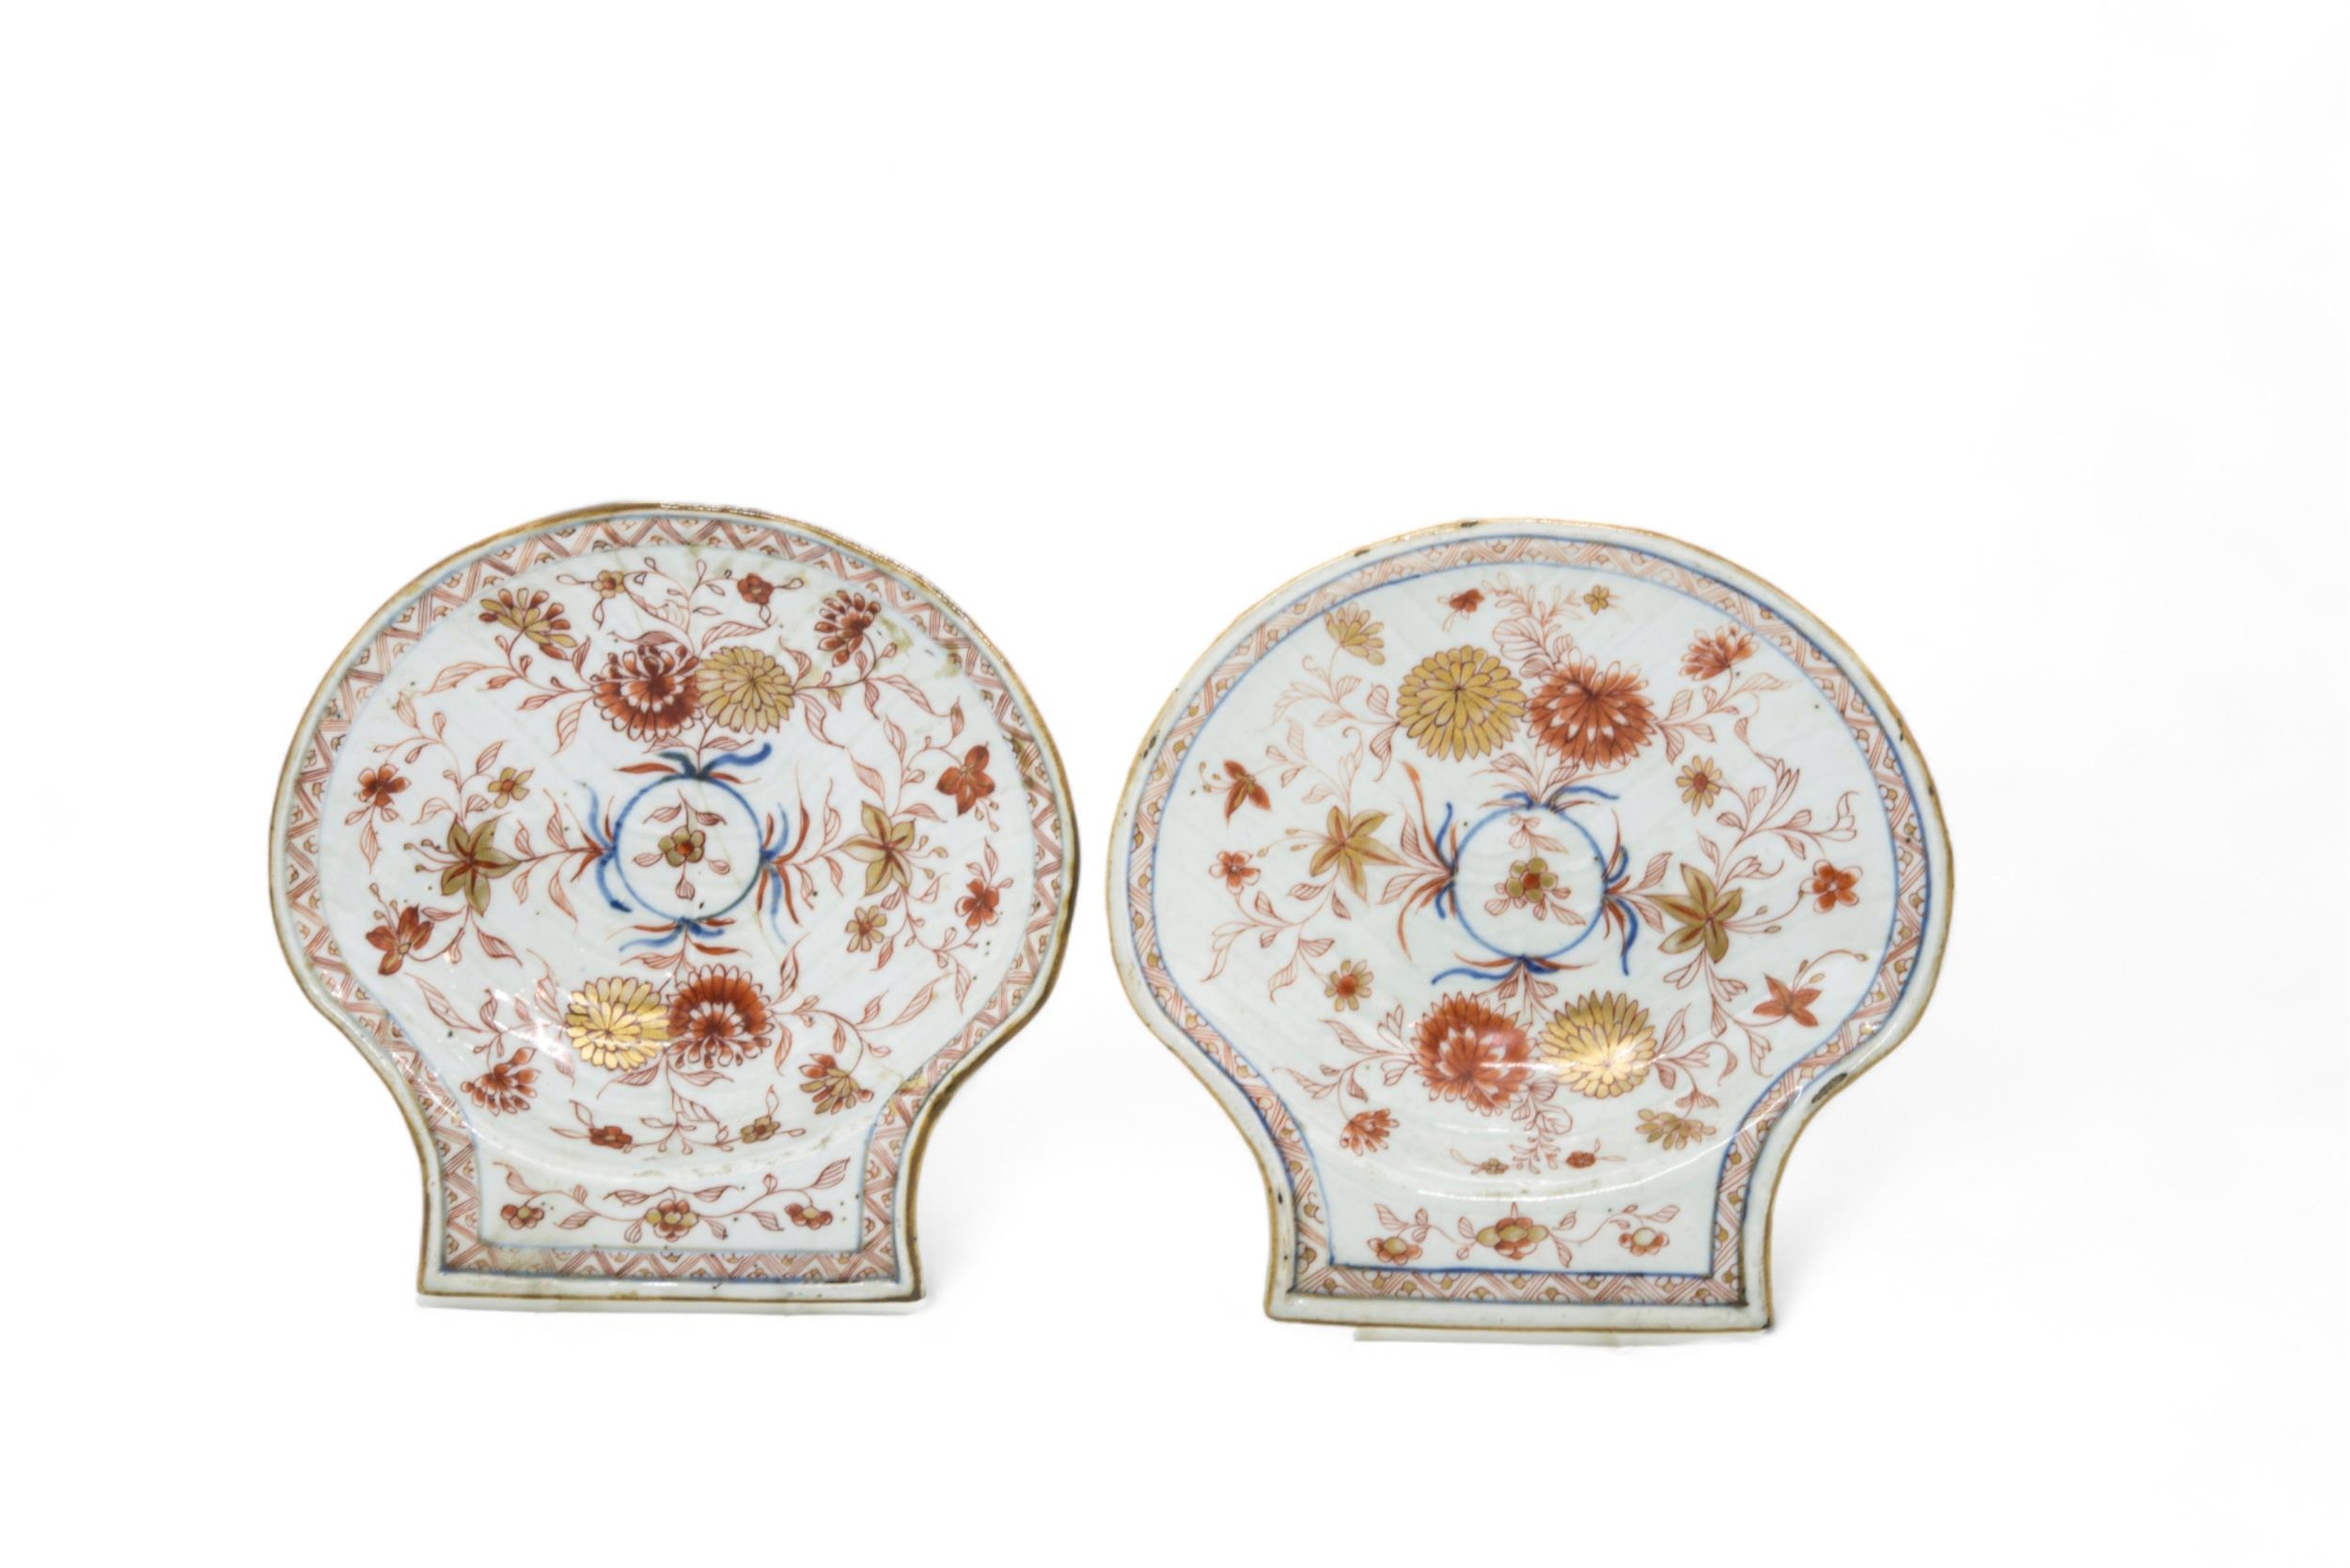 THREE PAIRS OF CHINESE EXPORT SHELL-FORM DISHES QING DYNASTY, 18TH CENTURY together with a single - Image 4 of 5